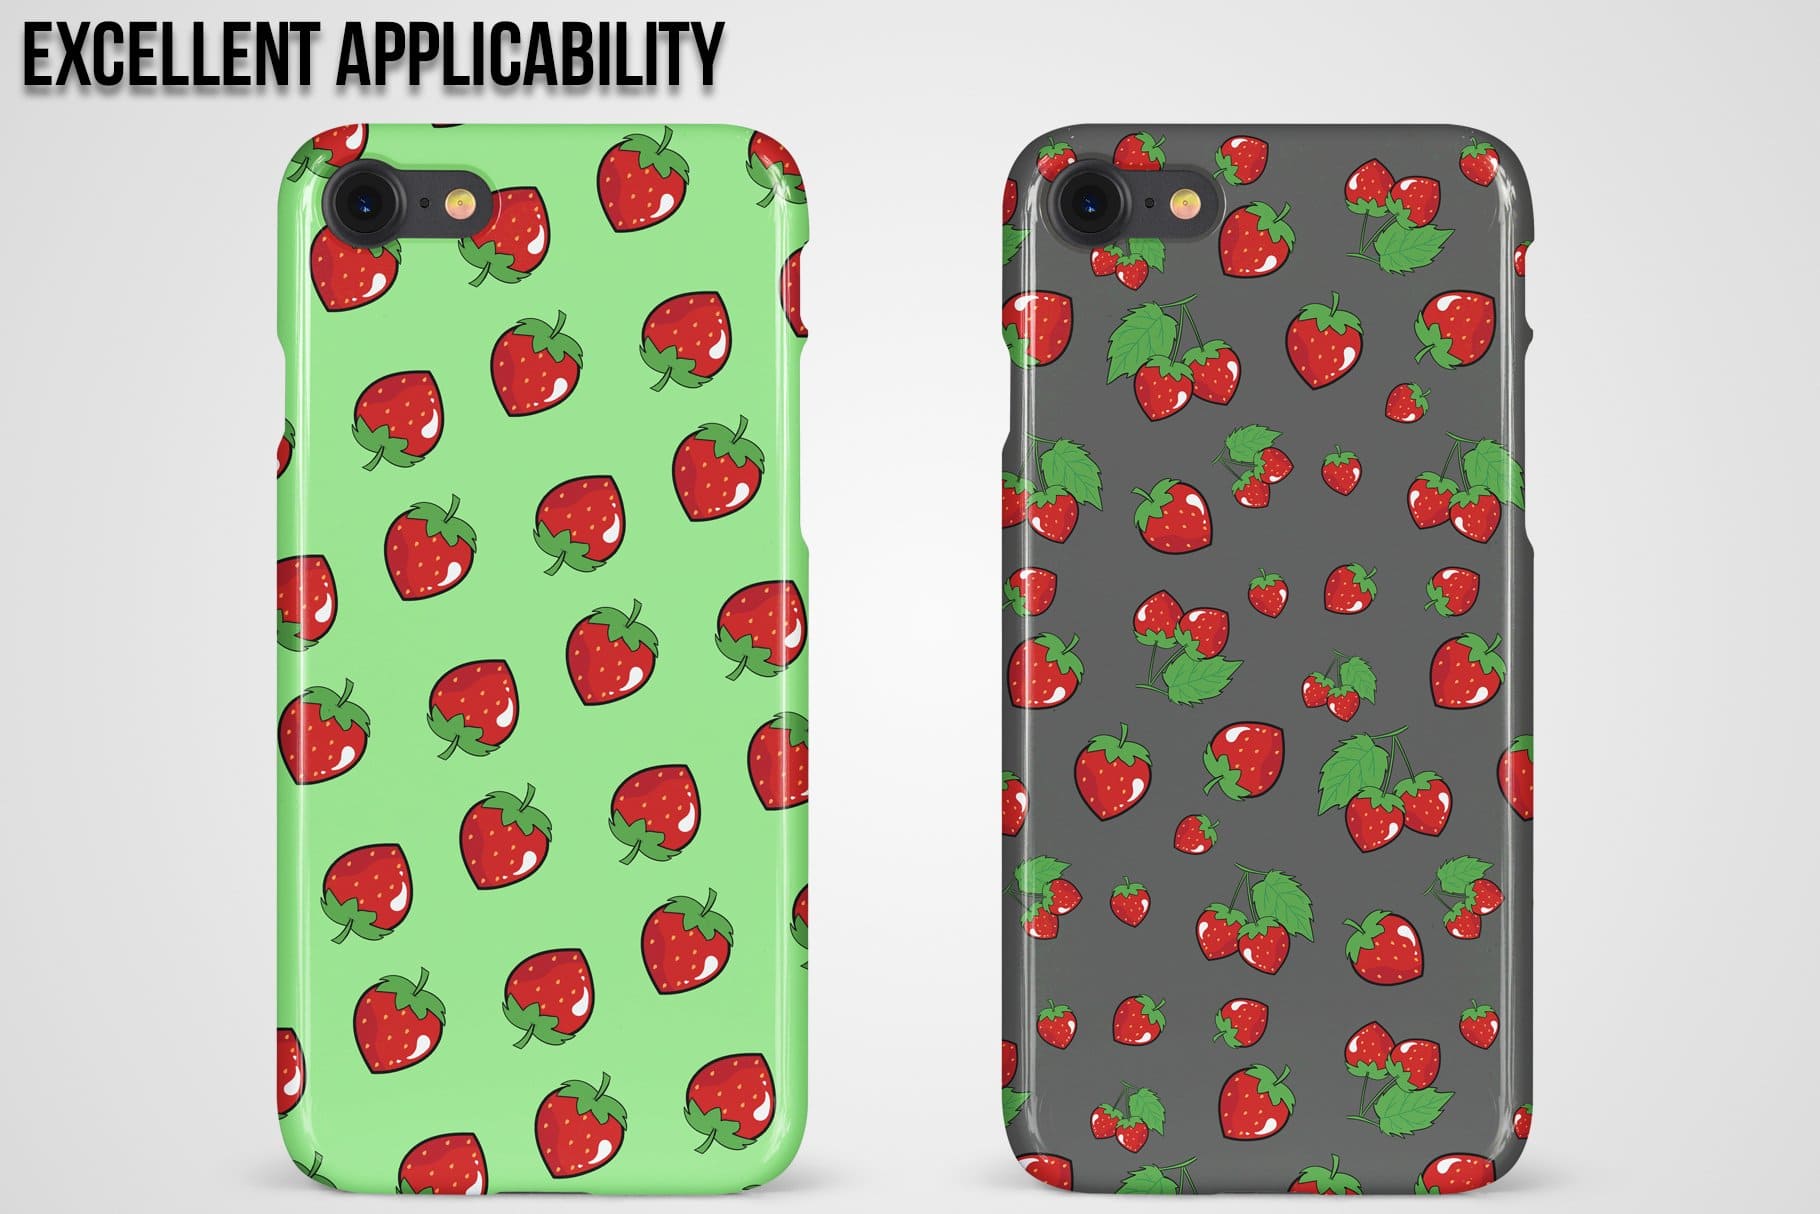 Green and gray phone cases with a strawberry design.